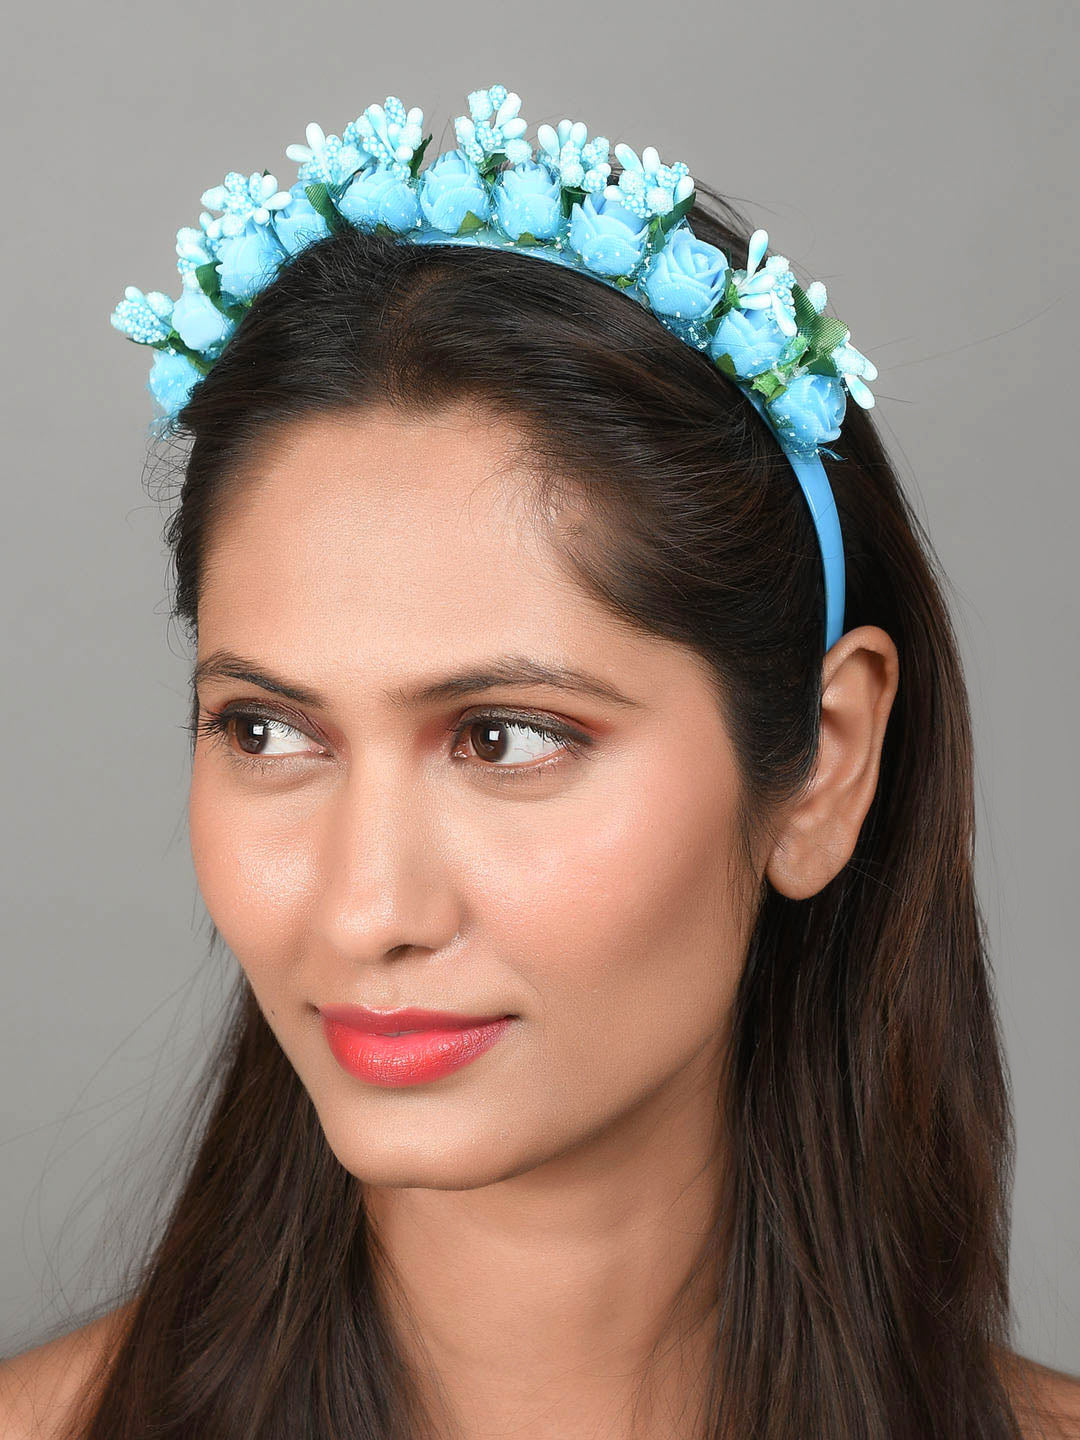 Sky Blue Flower Tiara Hairband With Tic Tac Hairpin